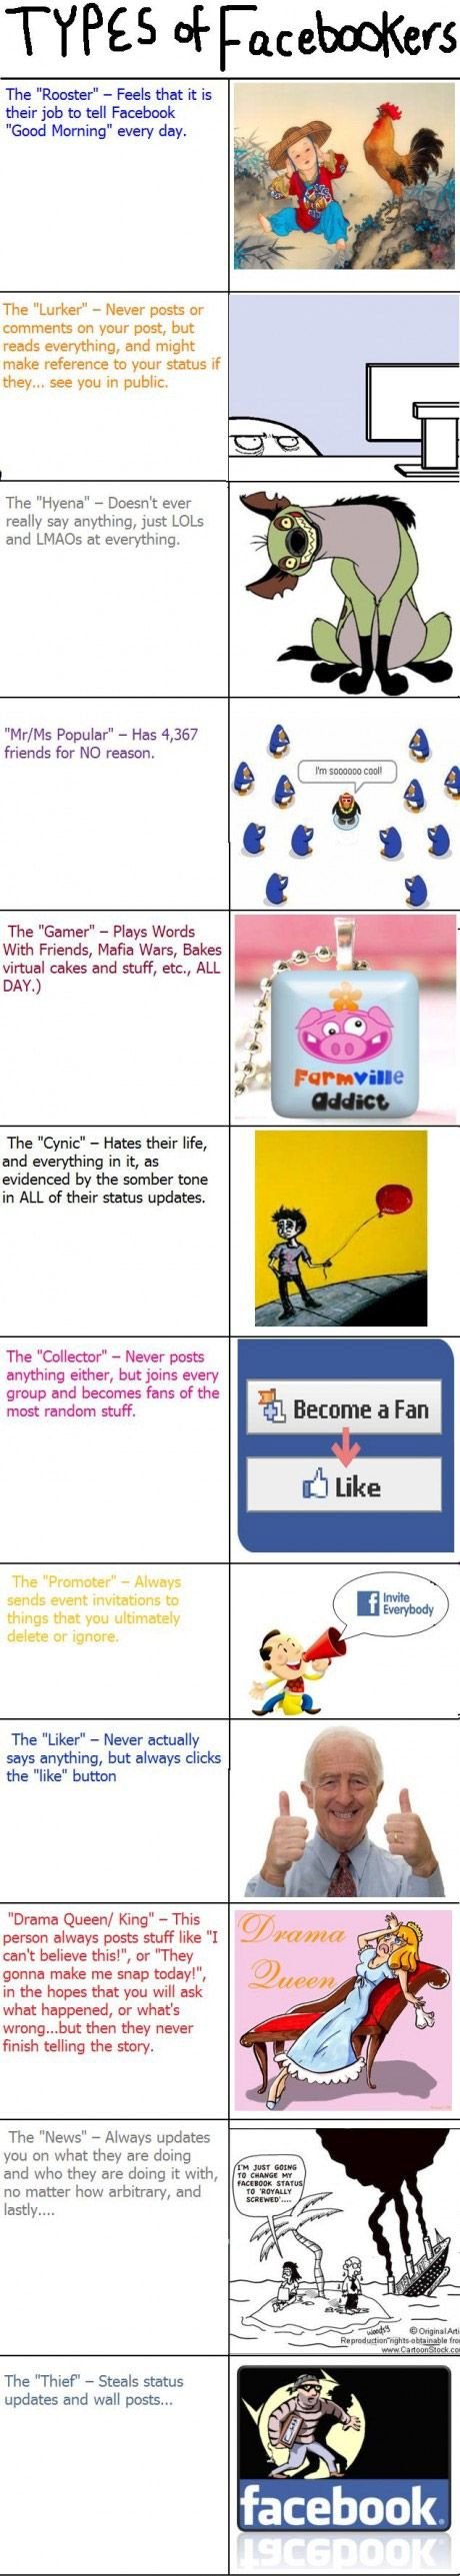 Types of Facebookers.